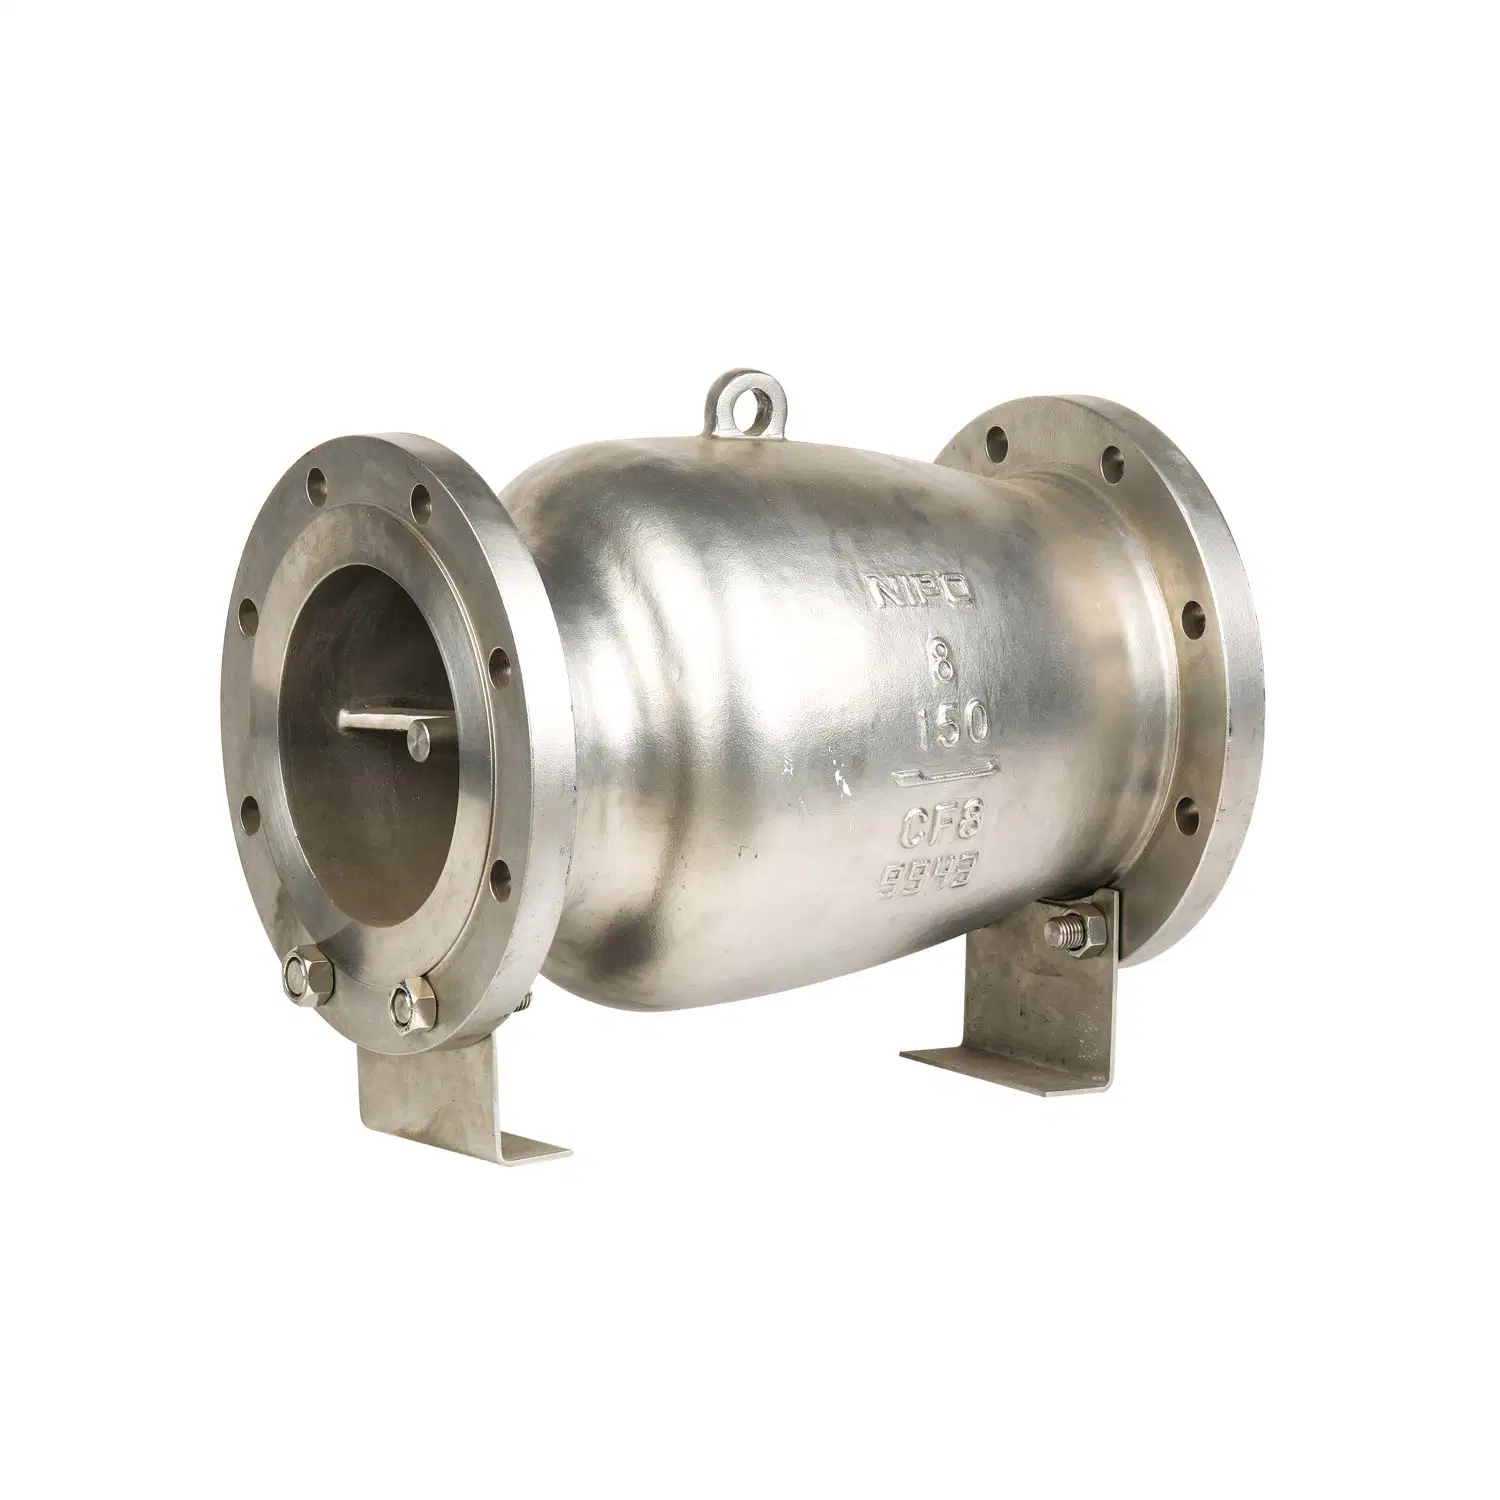 Stainless Steel Axial Flow Check Valve